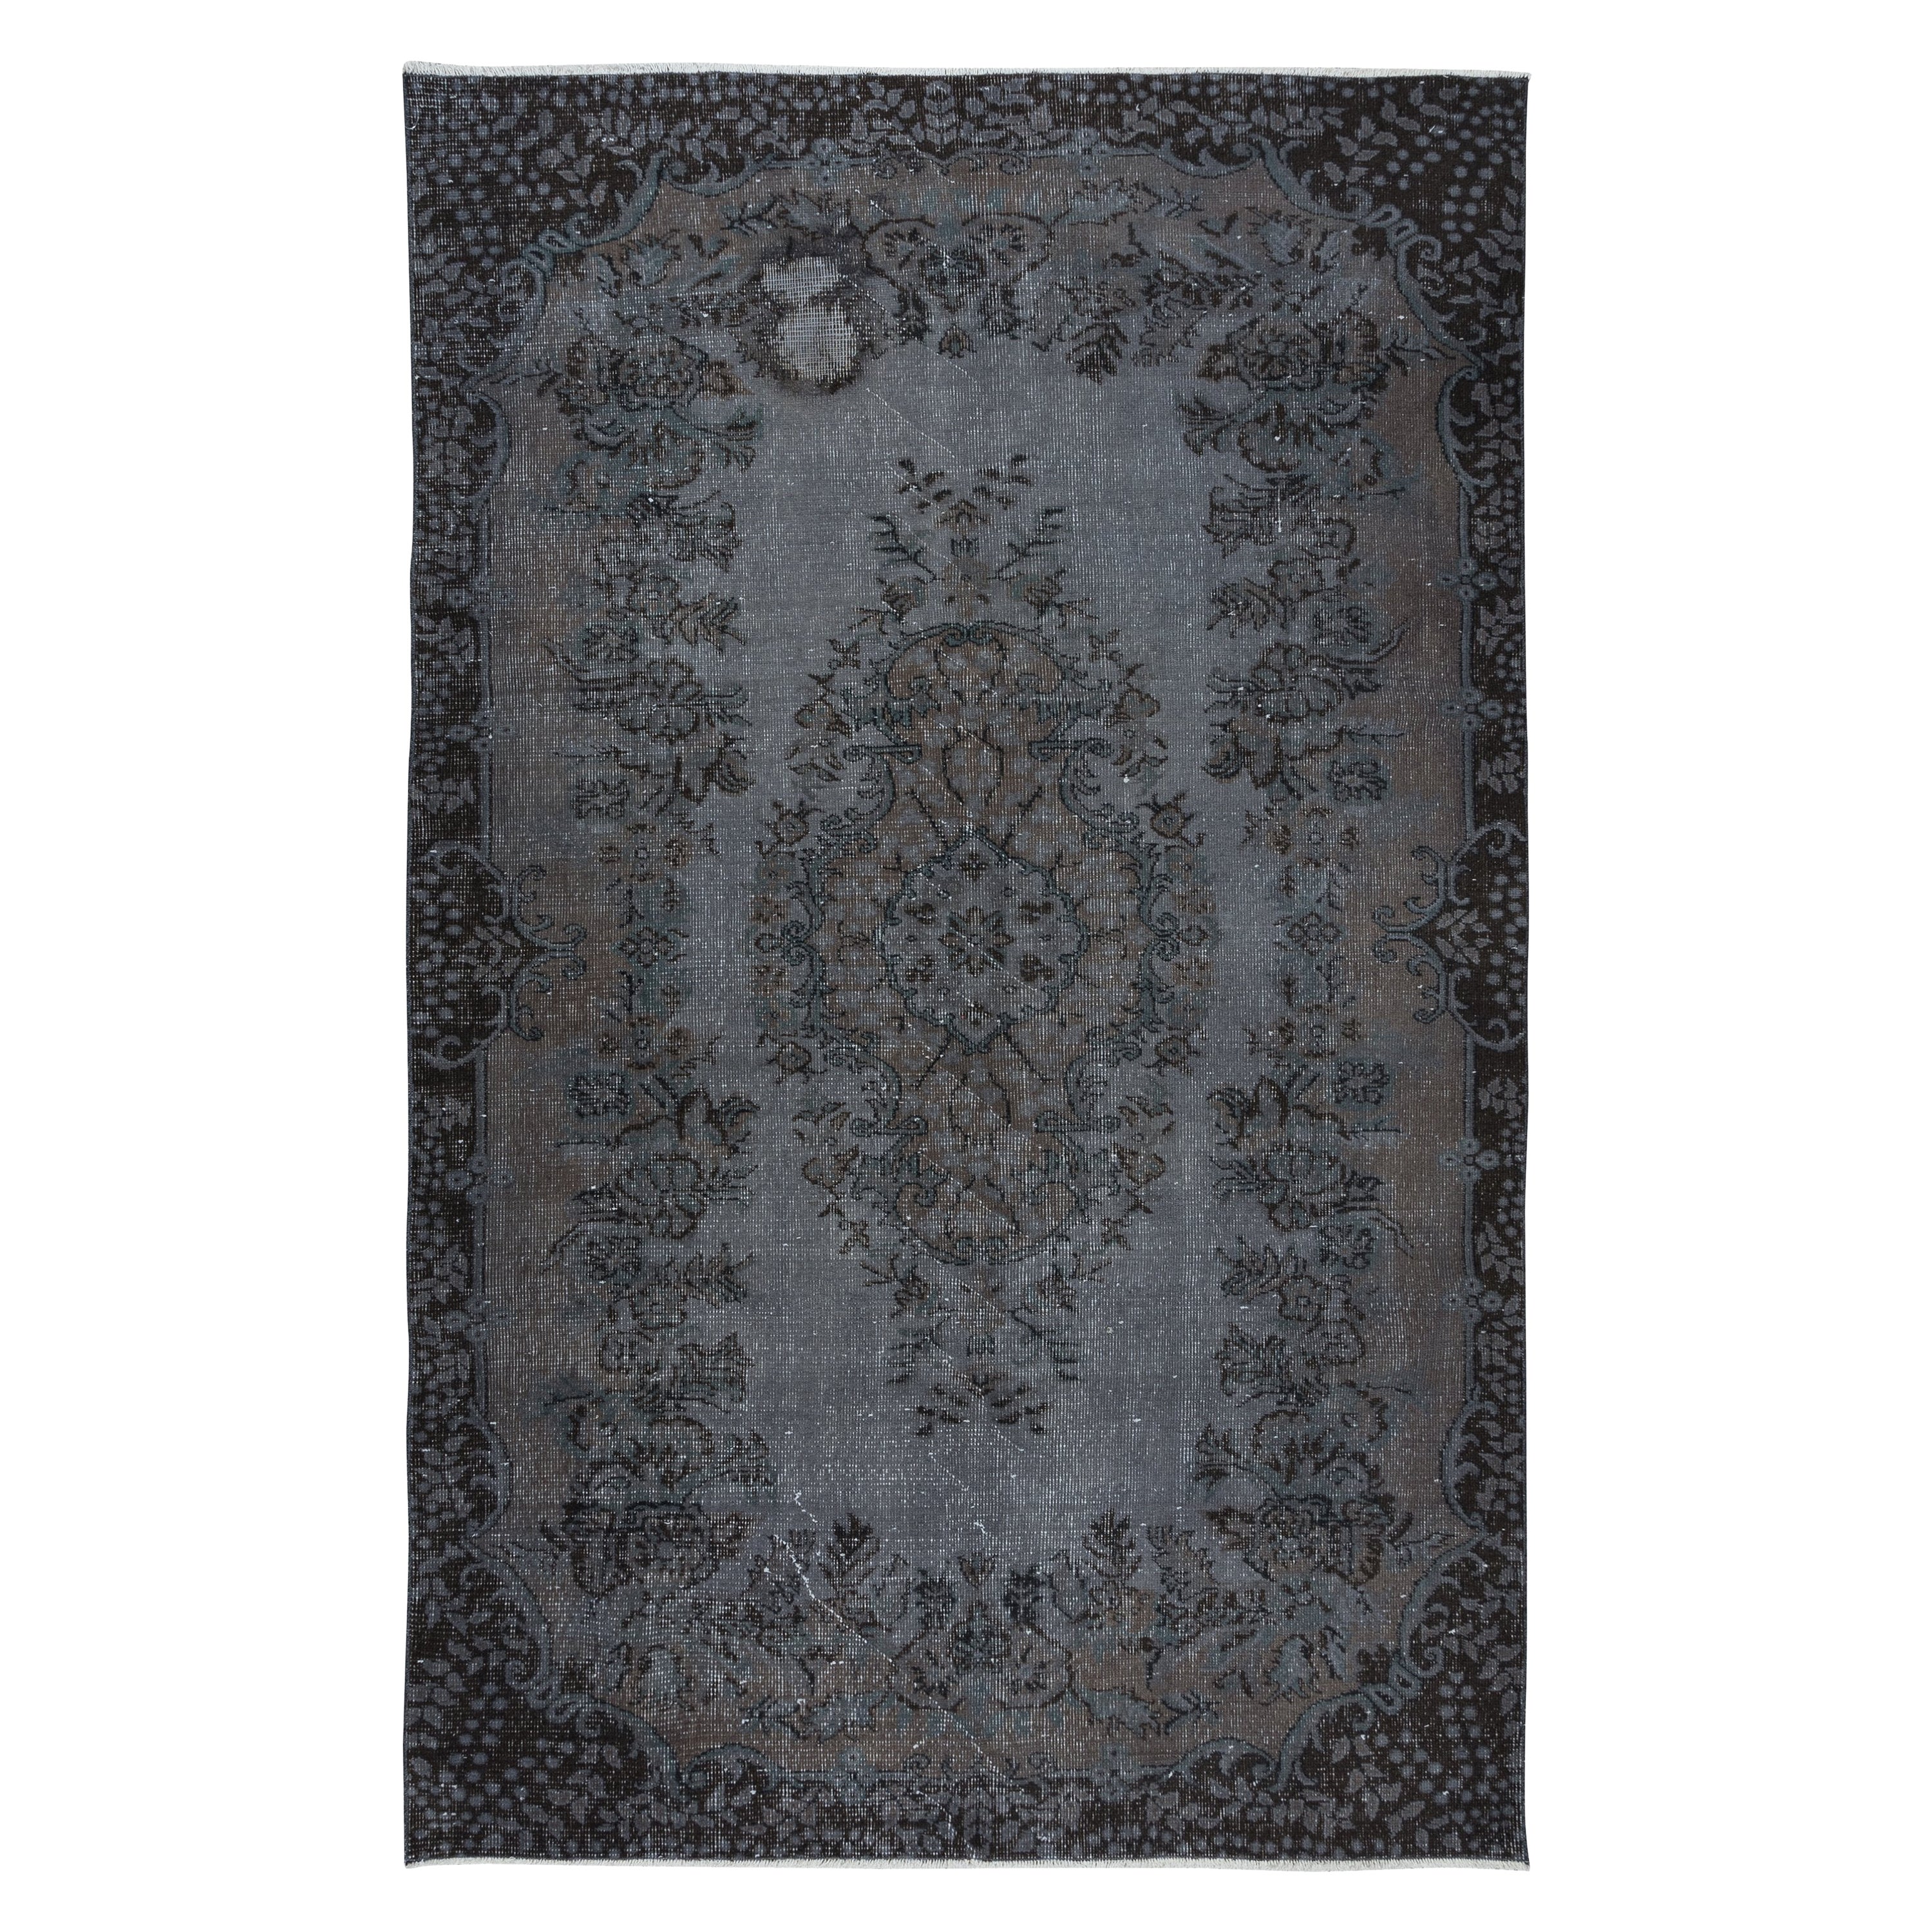 5.6x8.8 Ft Contemporary Handmade Gray Indoor Outdoor Rug with Medallion Design